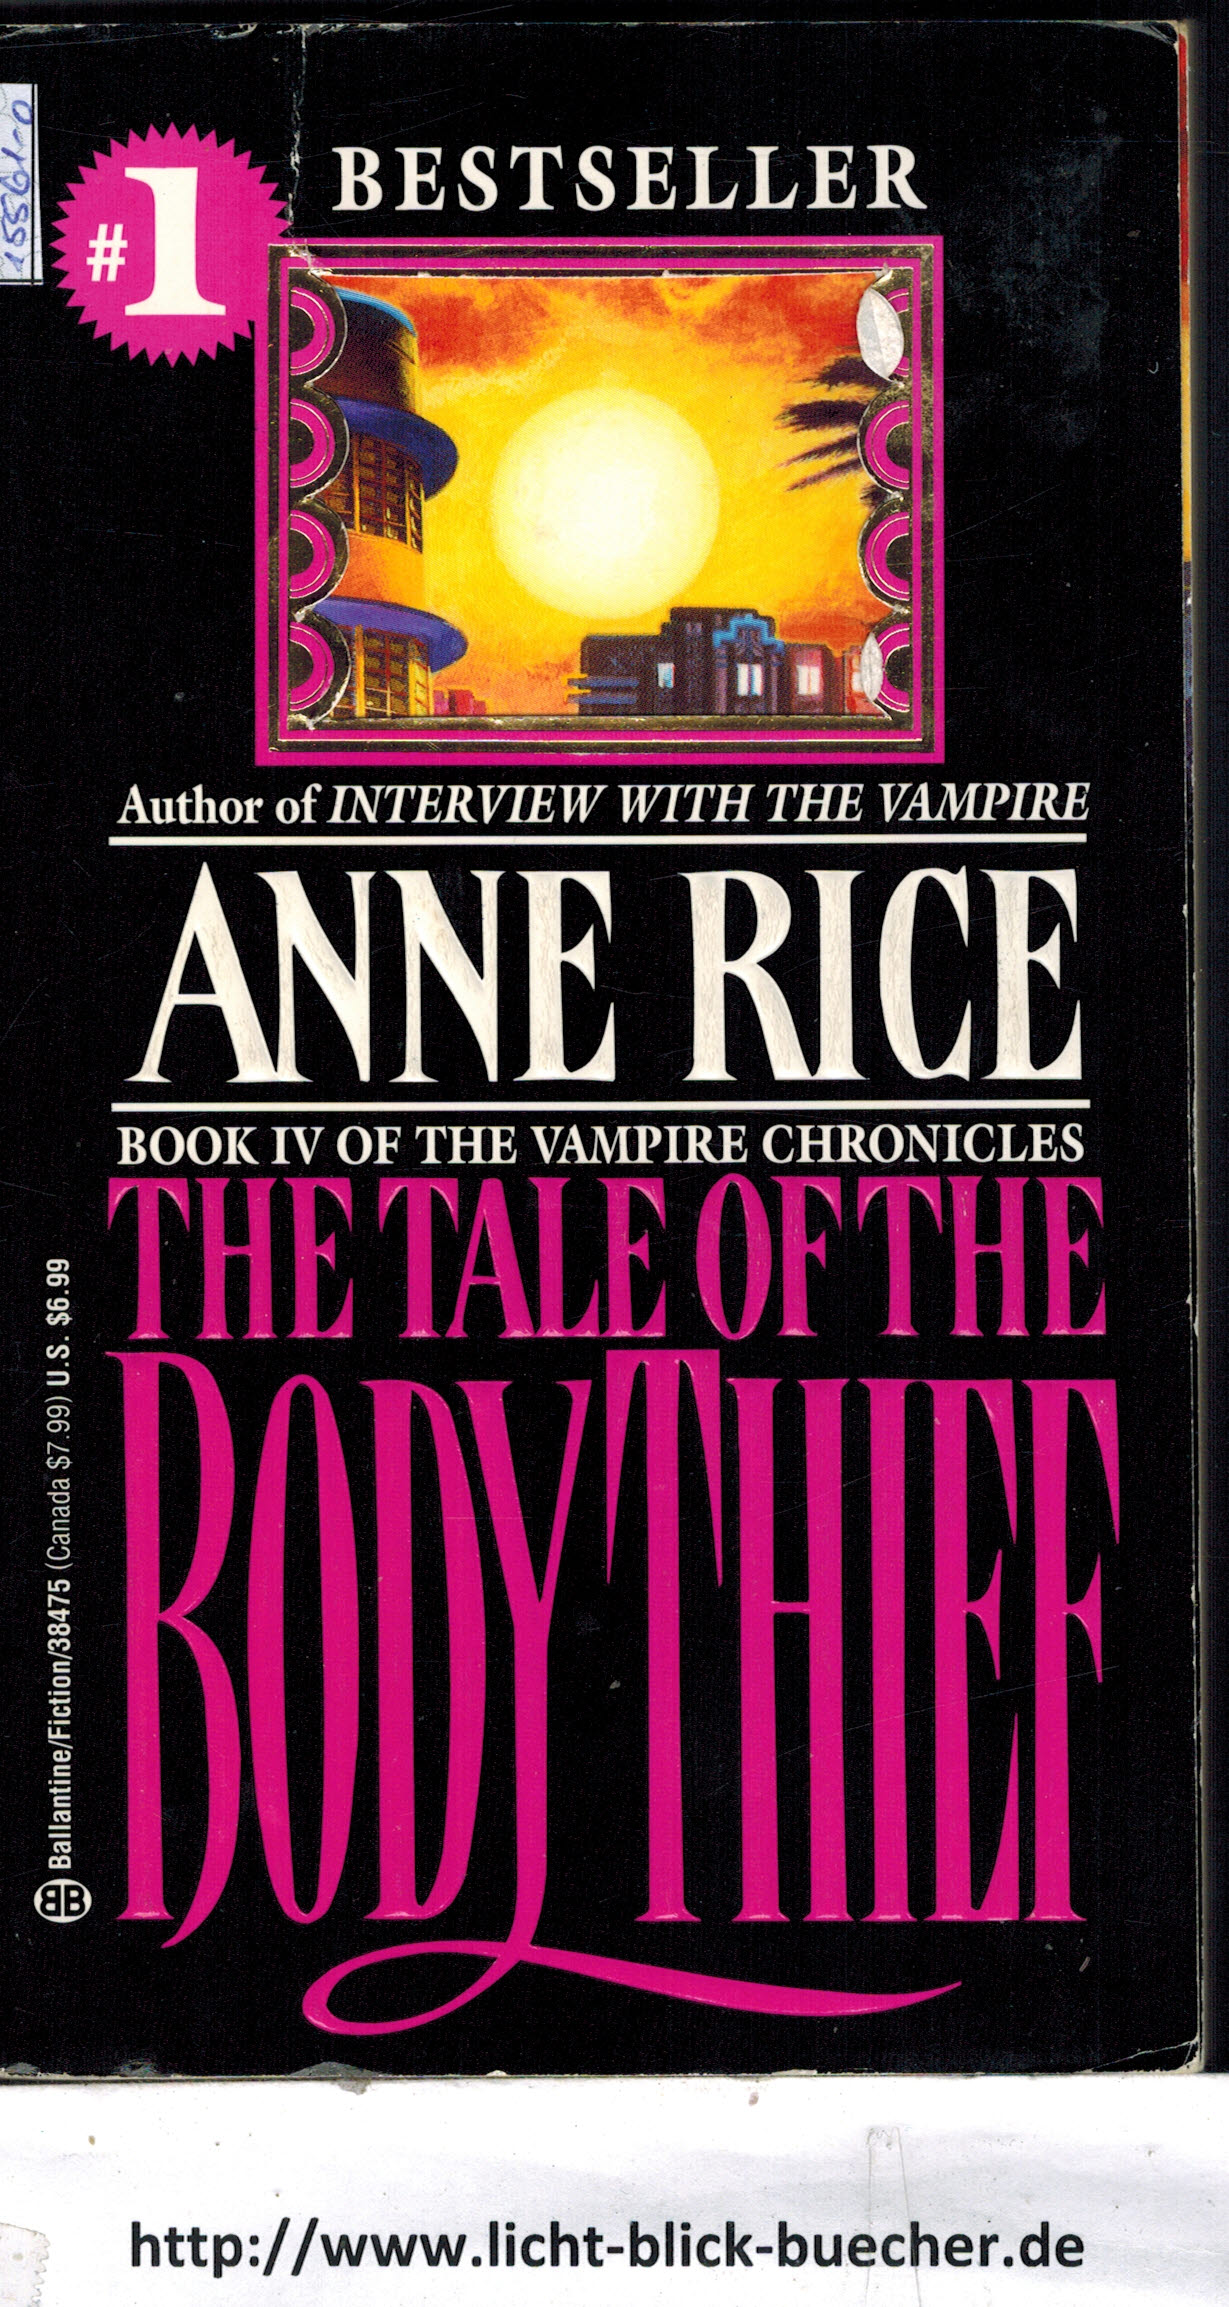 The Tale of Body ThiefAnne Rice